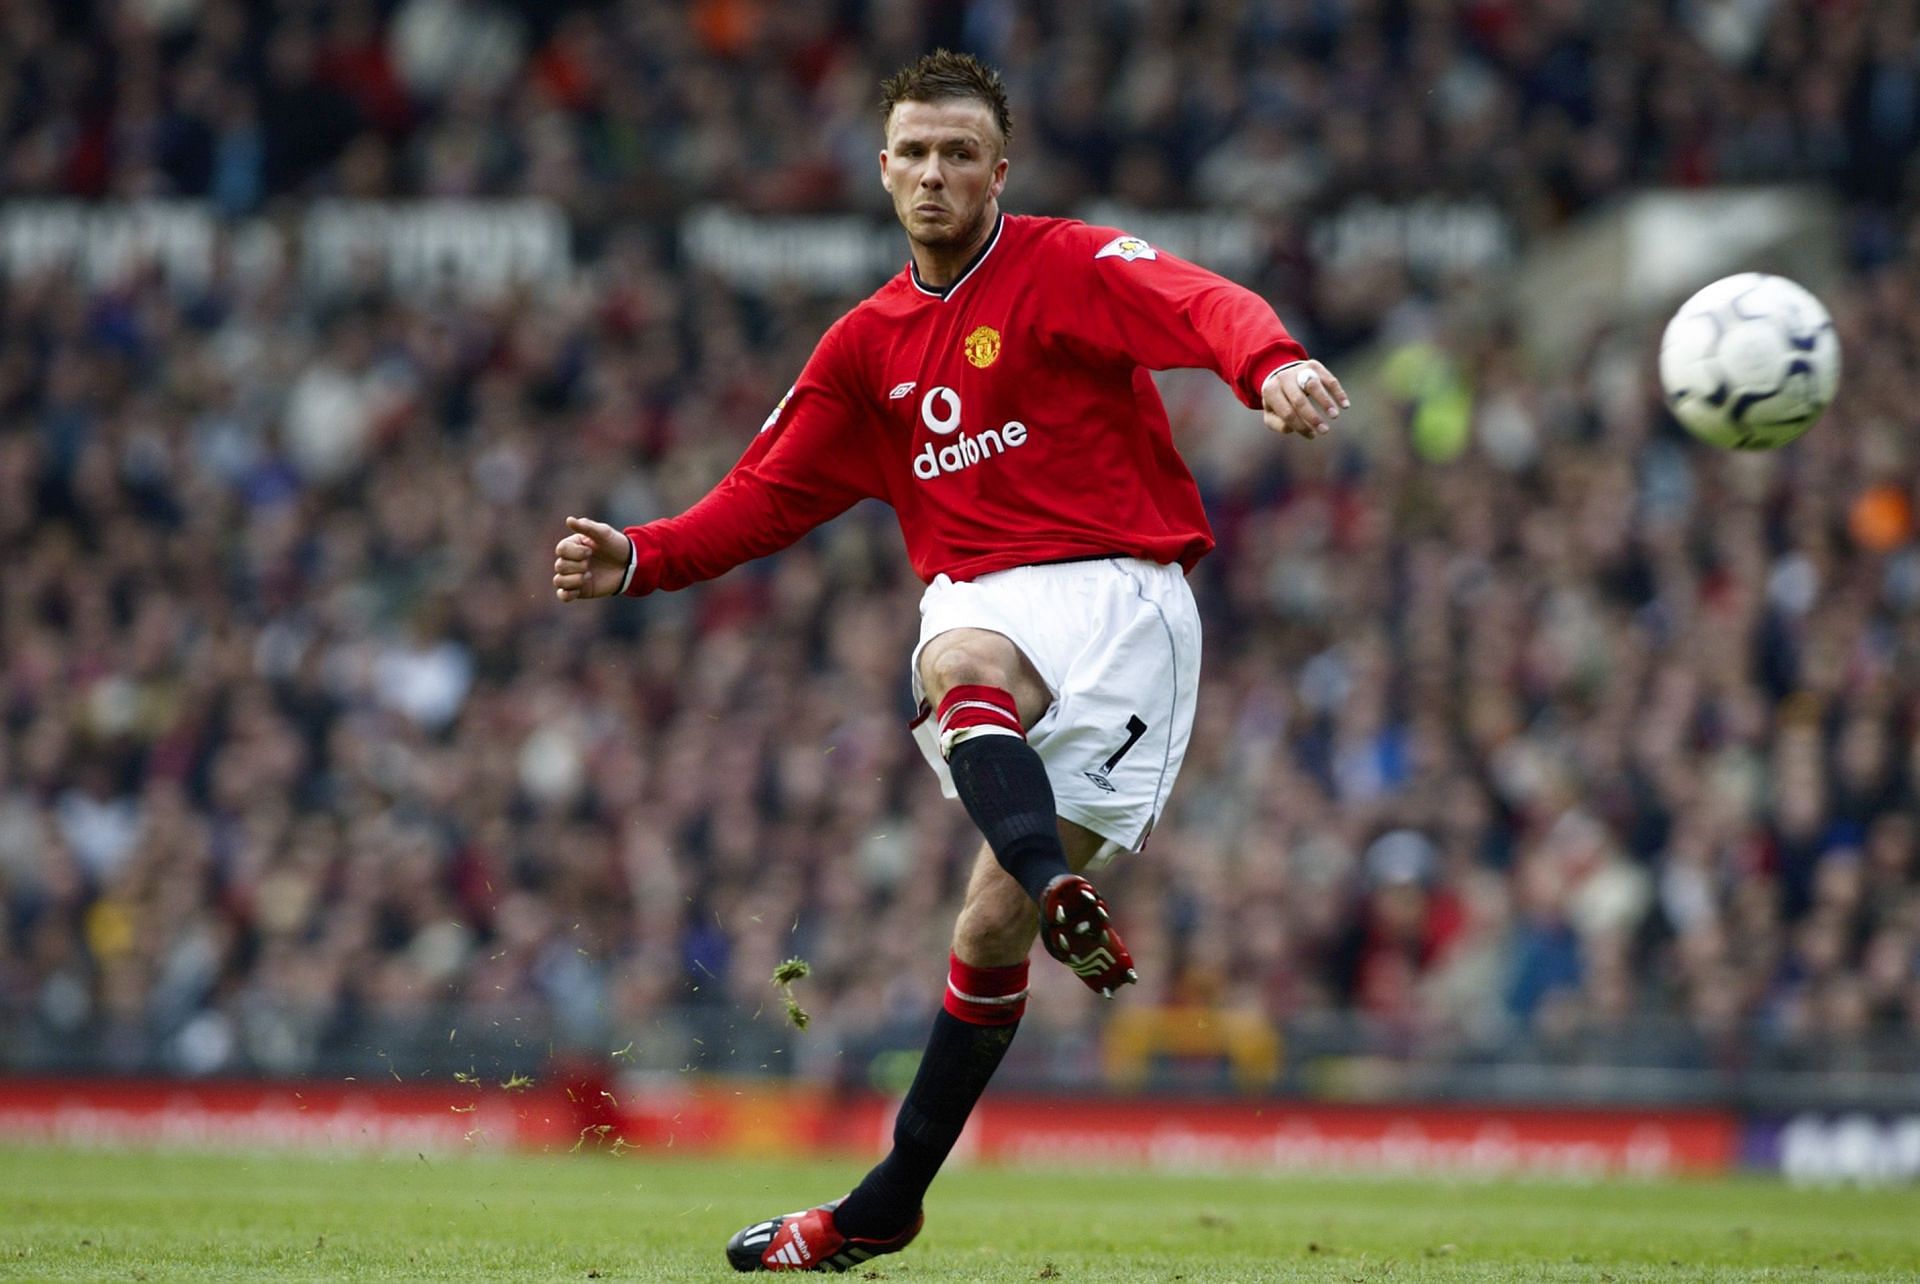 David Beckham takes a free-kick during his time with Manchester United